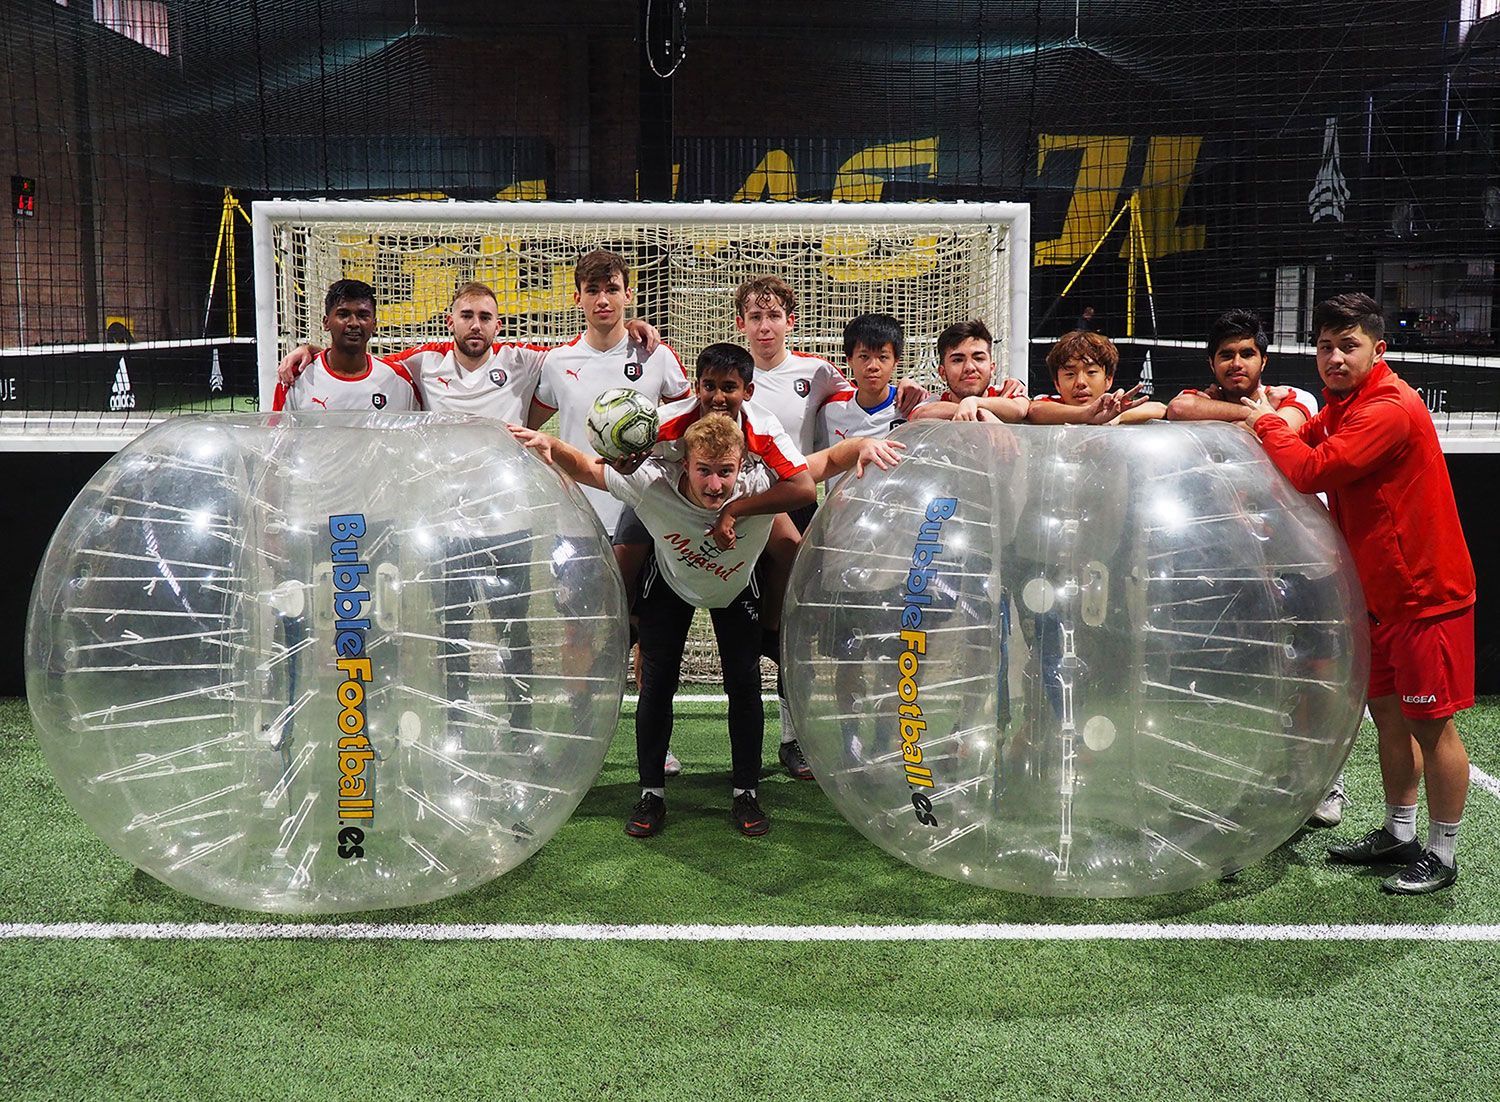 B1 Players at Bubble Soccer